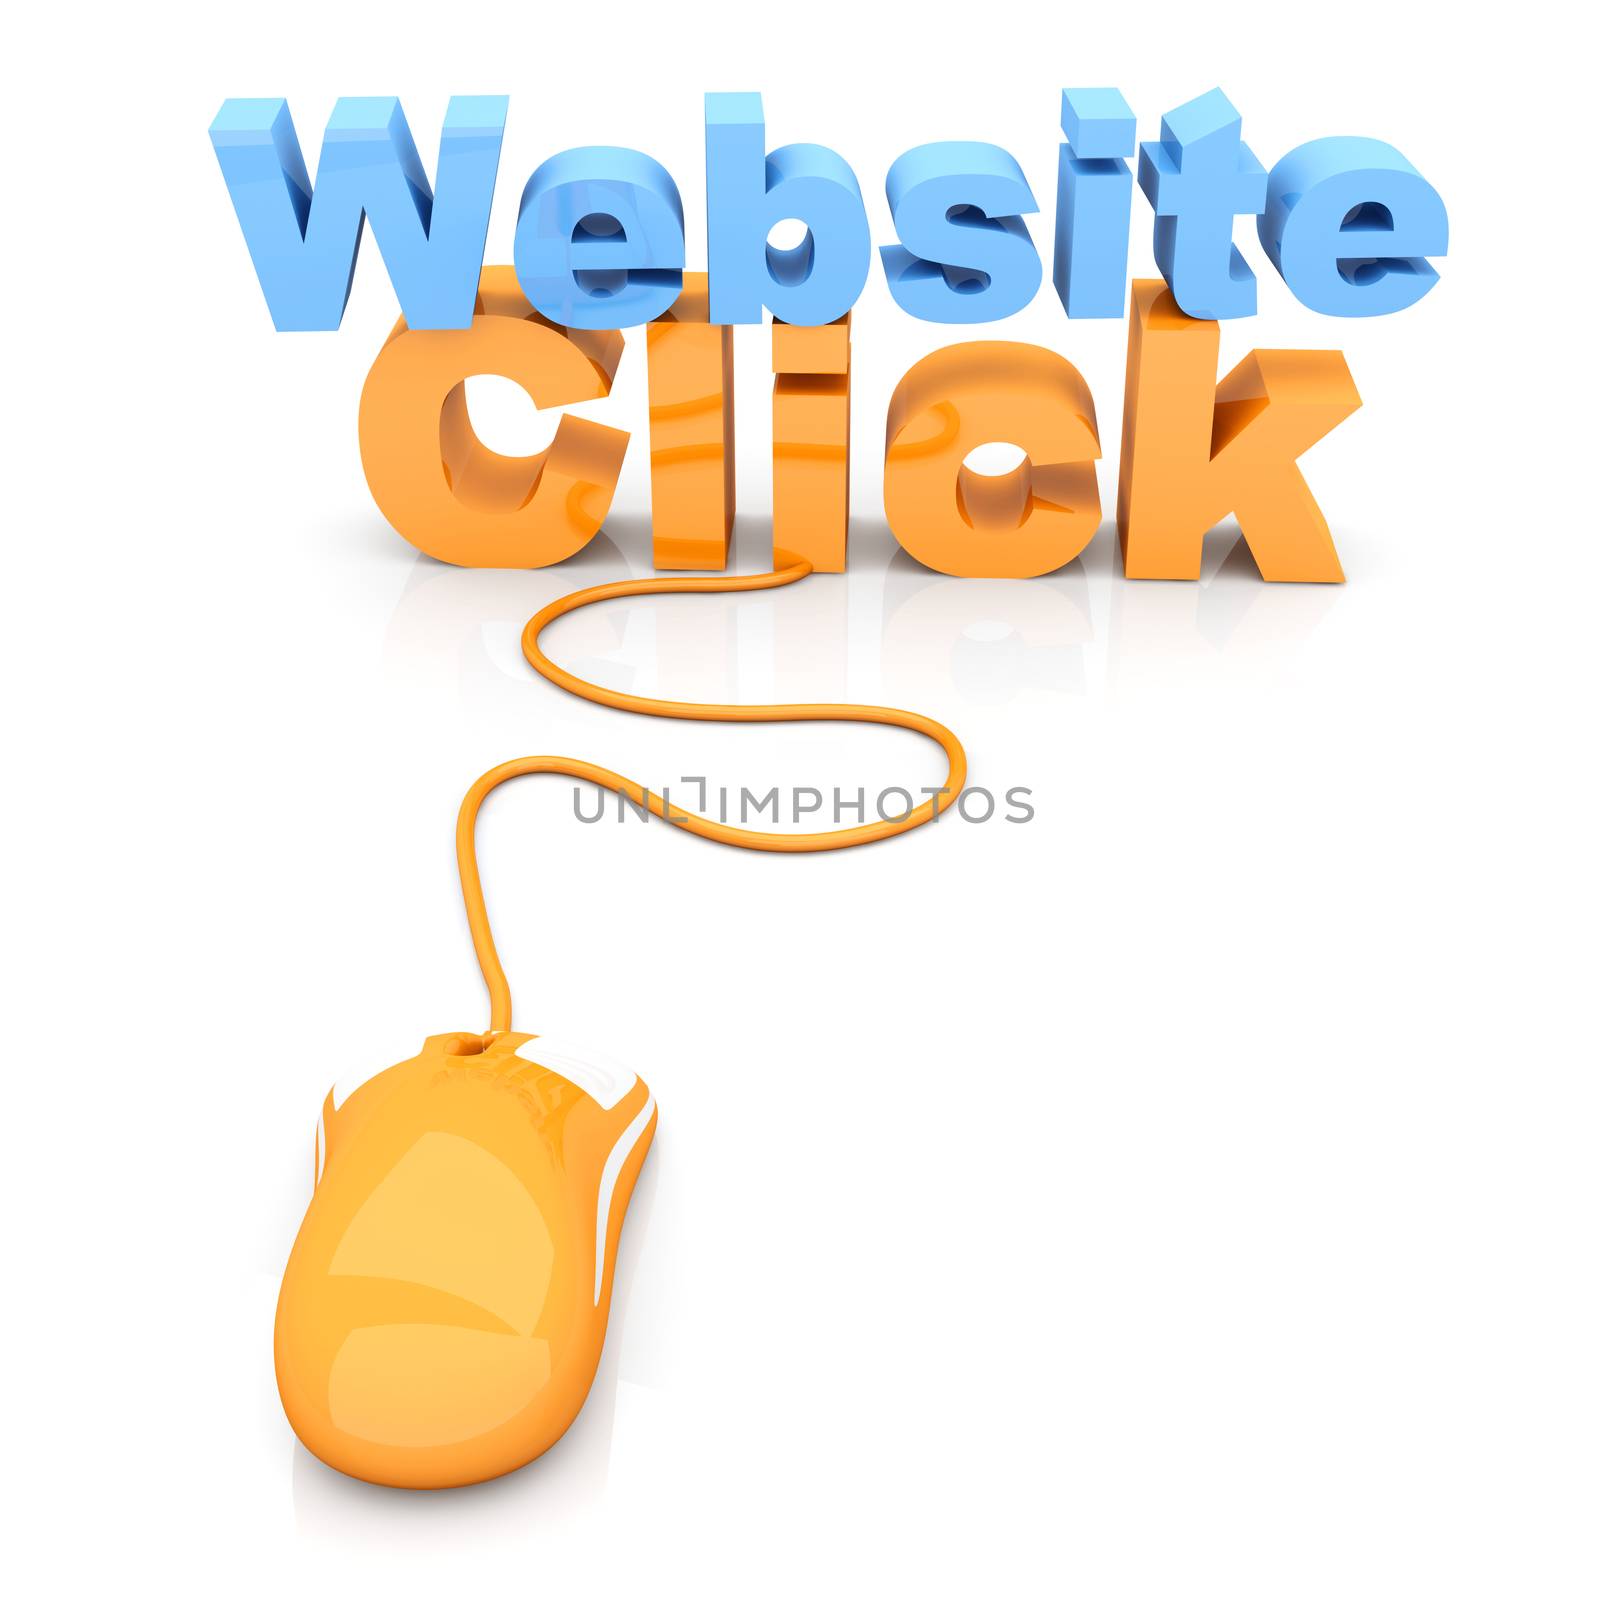 Website click. 3D rendered Illustration. Isolated on white.